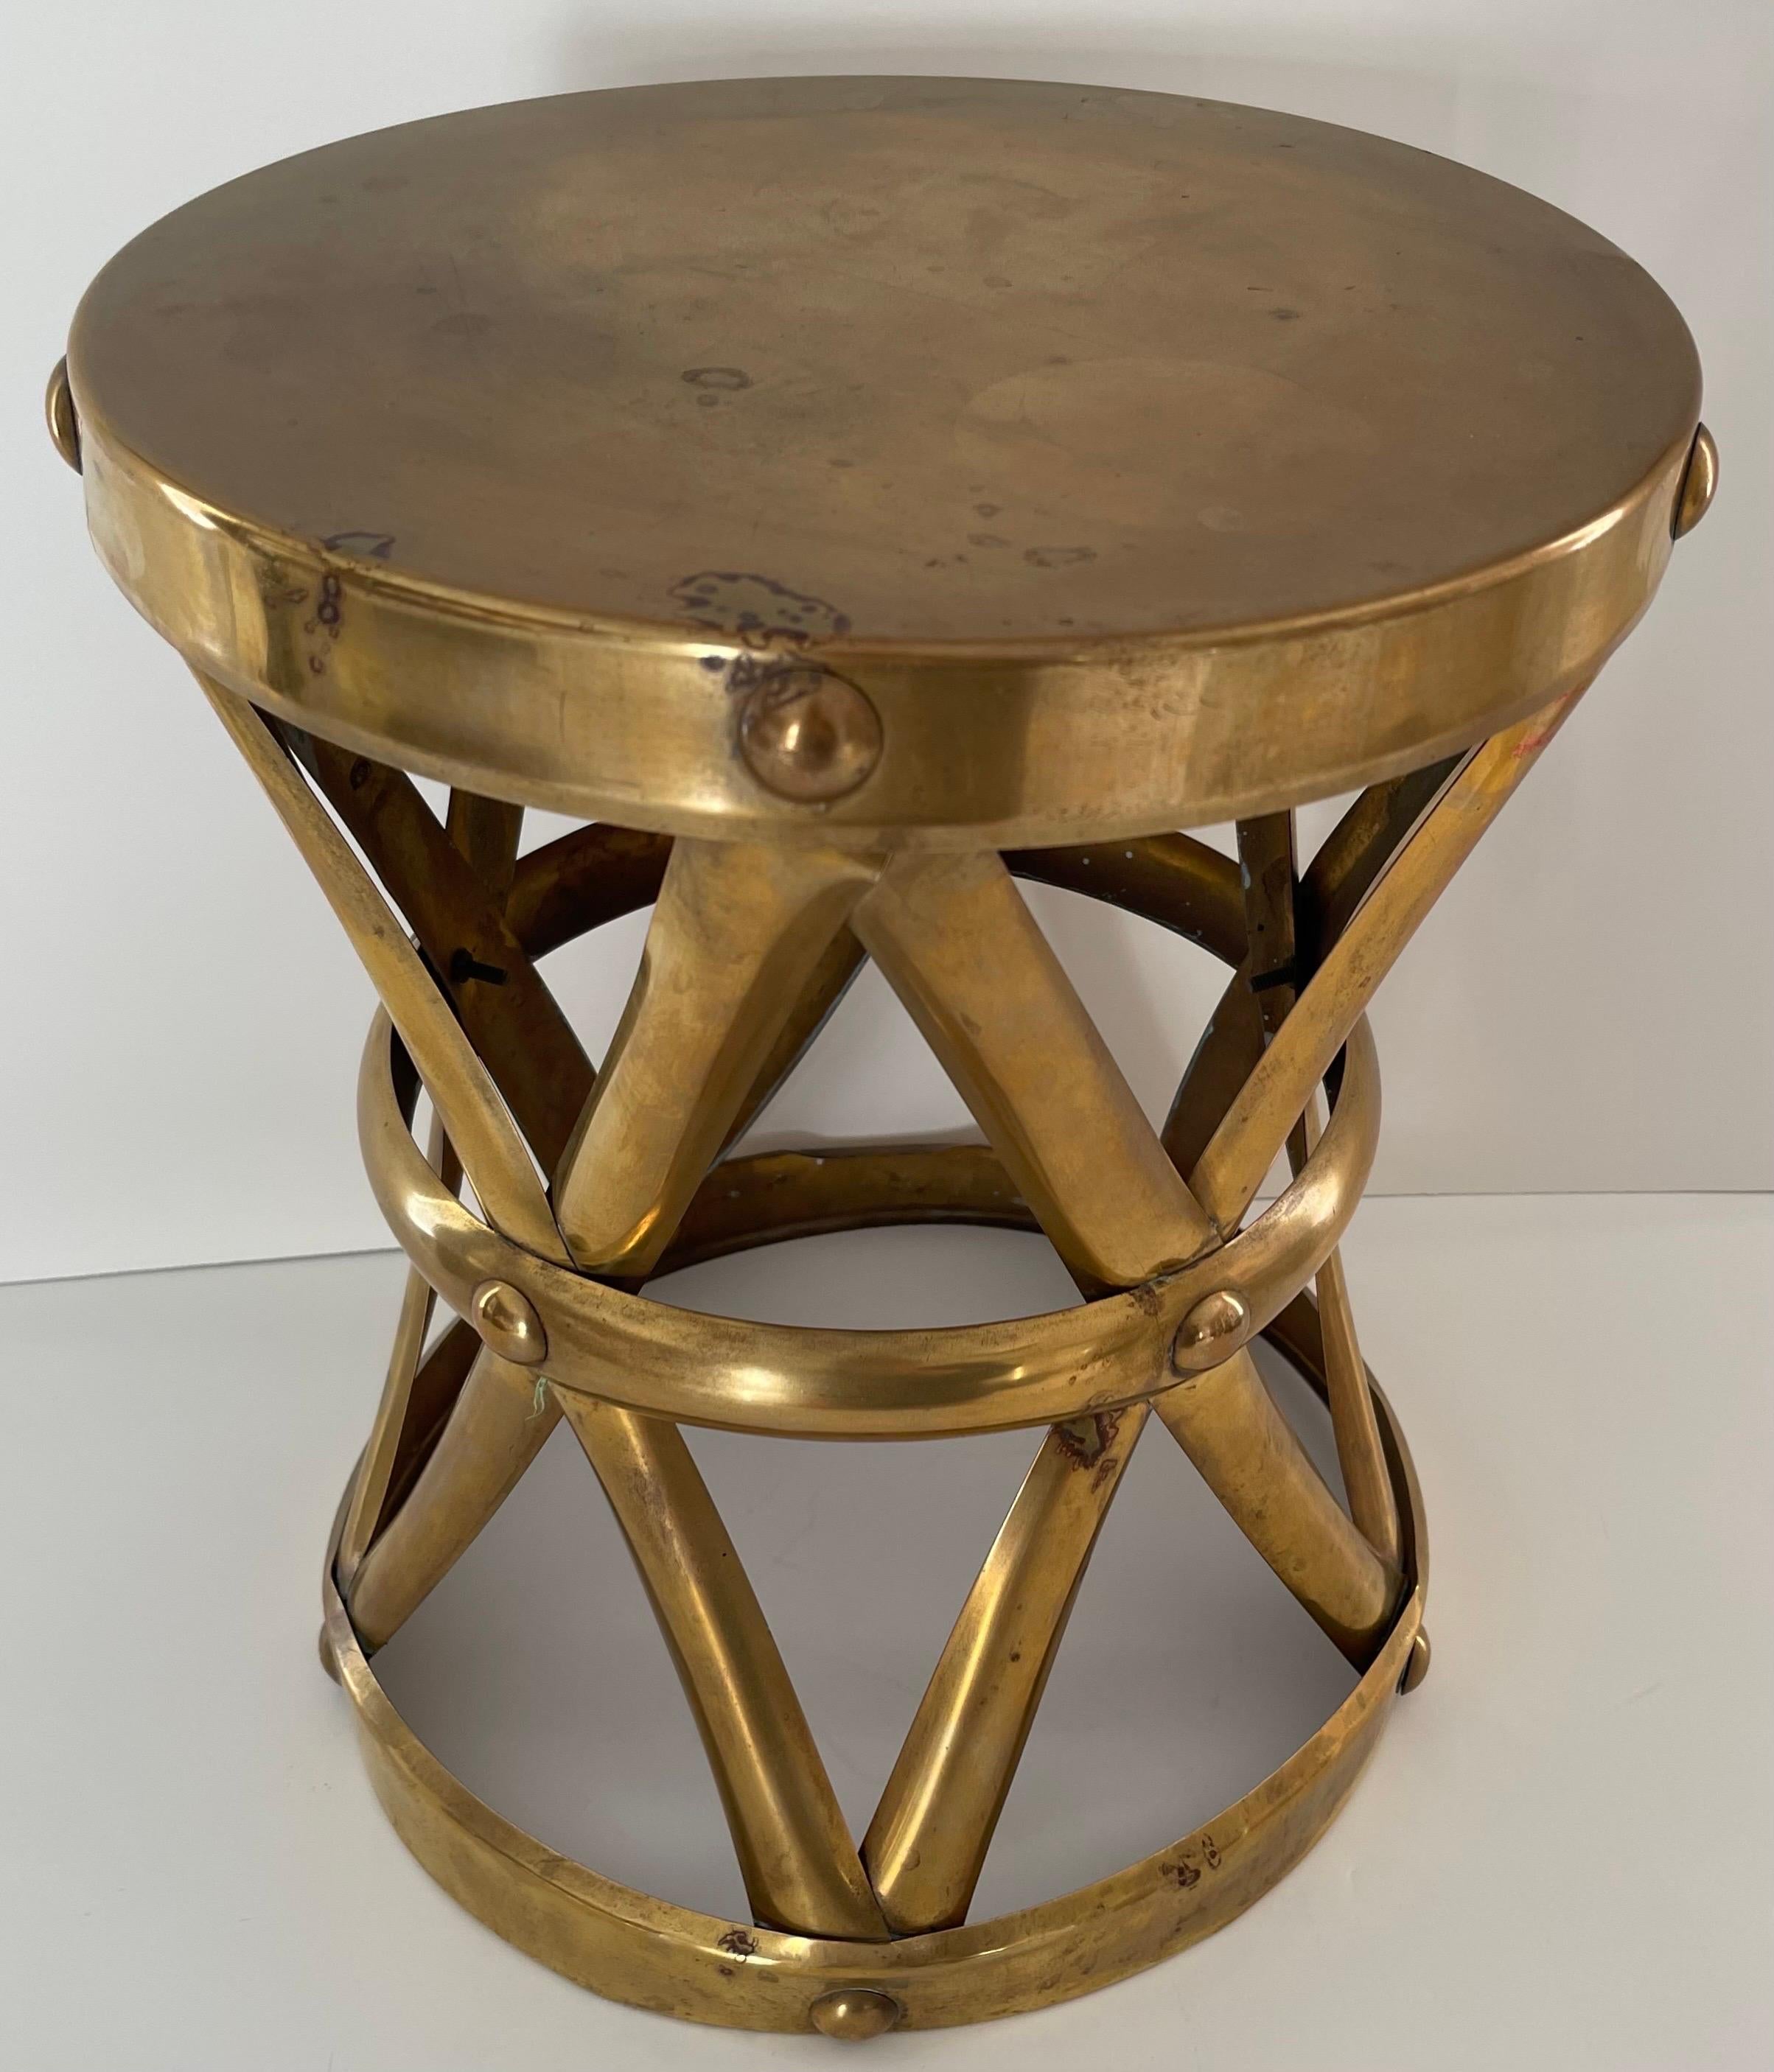 1970s brass tabouret stool or side table. Overall as found, unpolished patina.